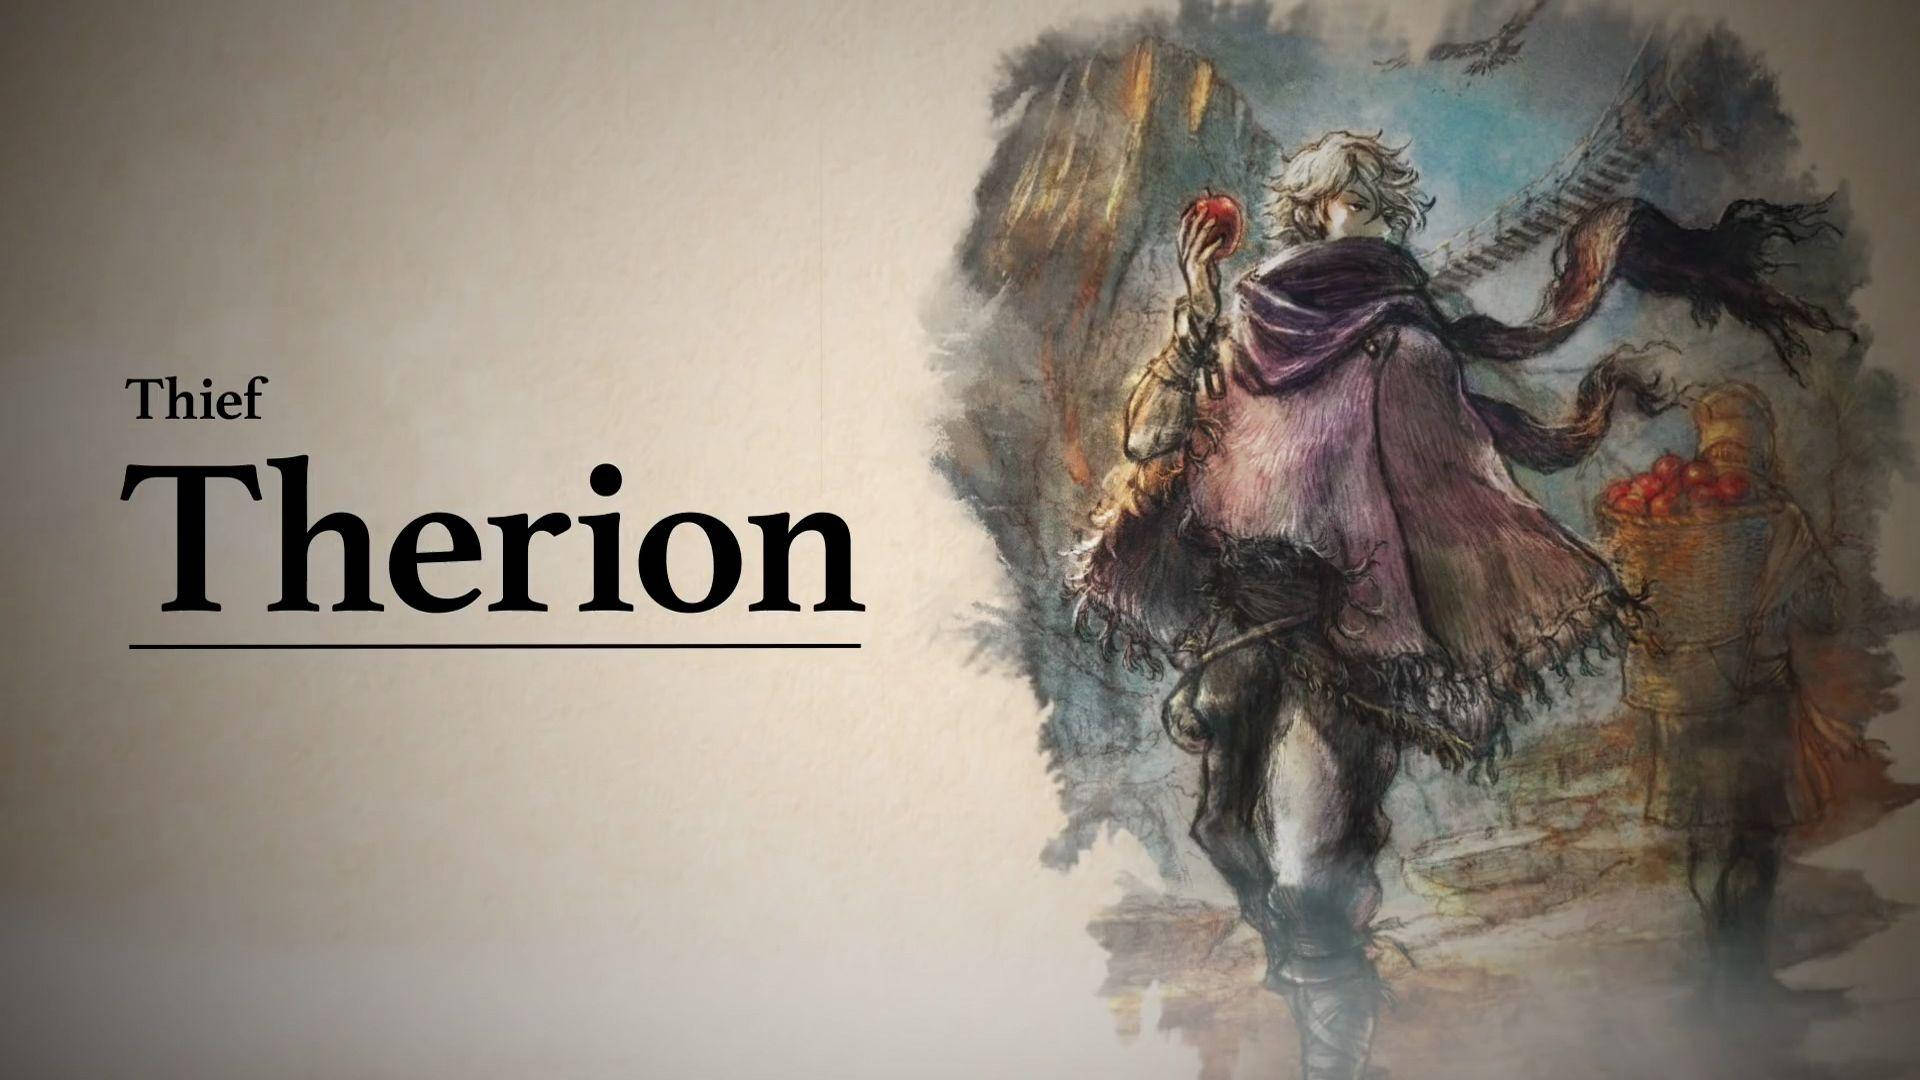 Octopath Traveler Thief Therion